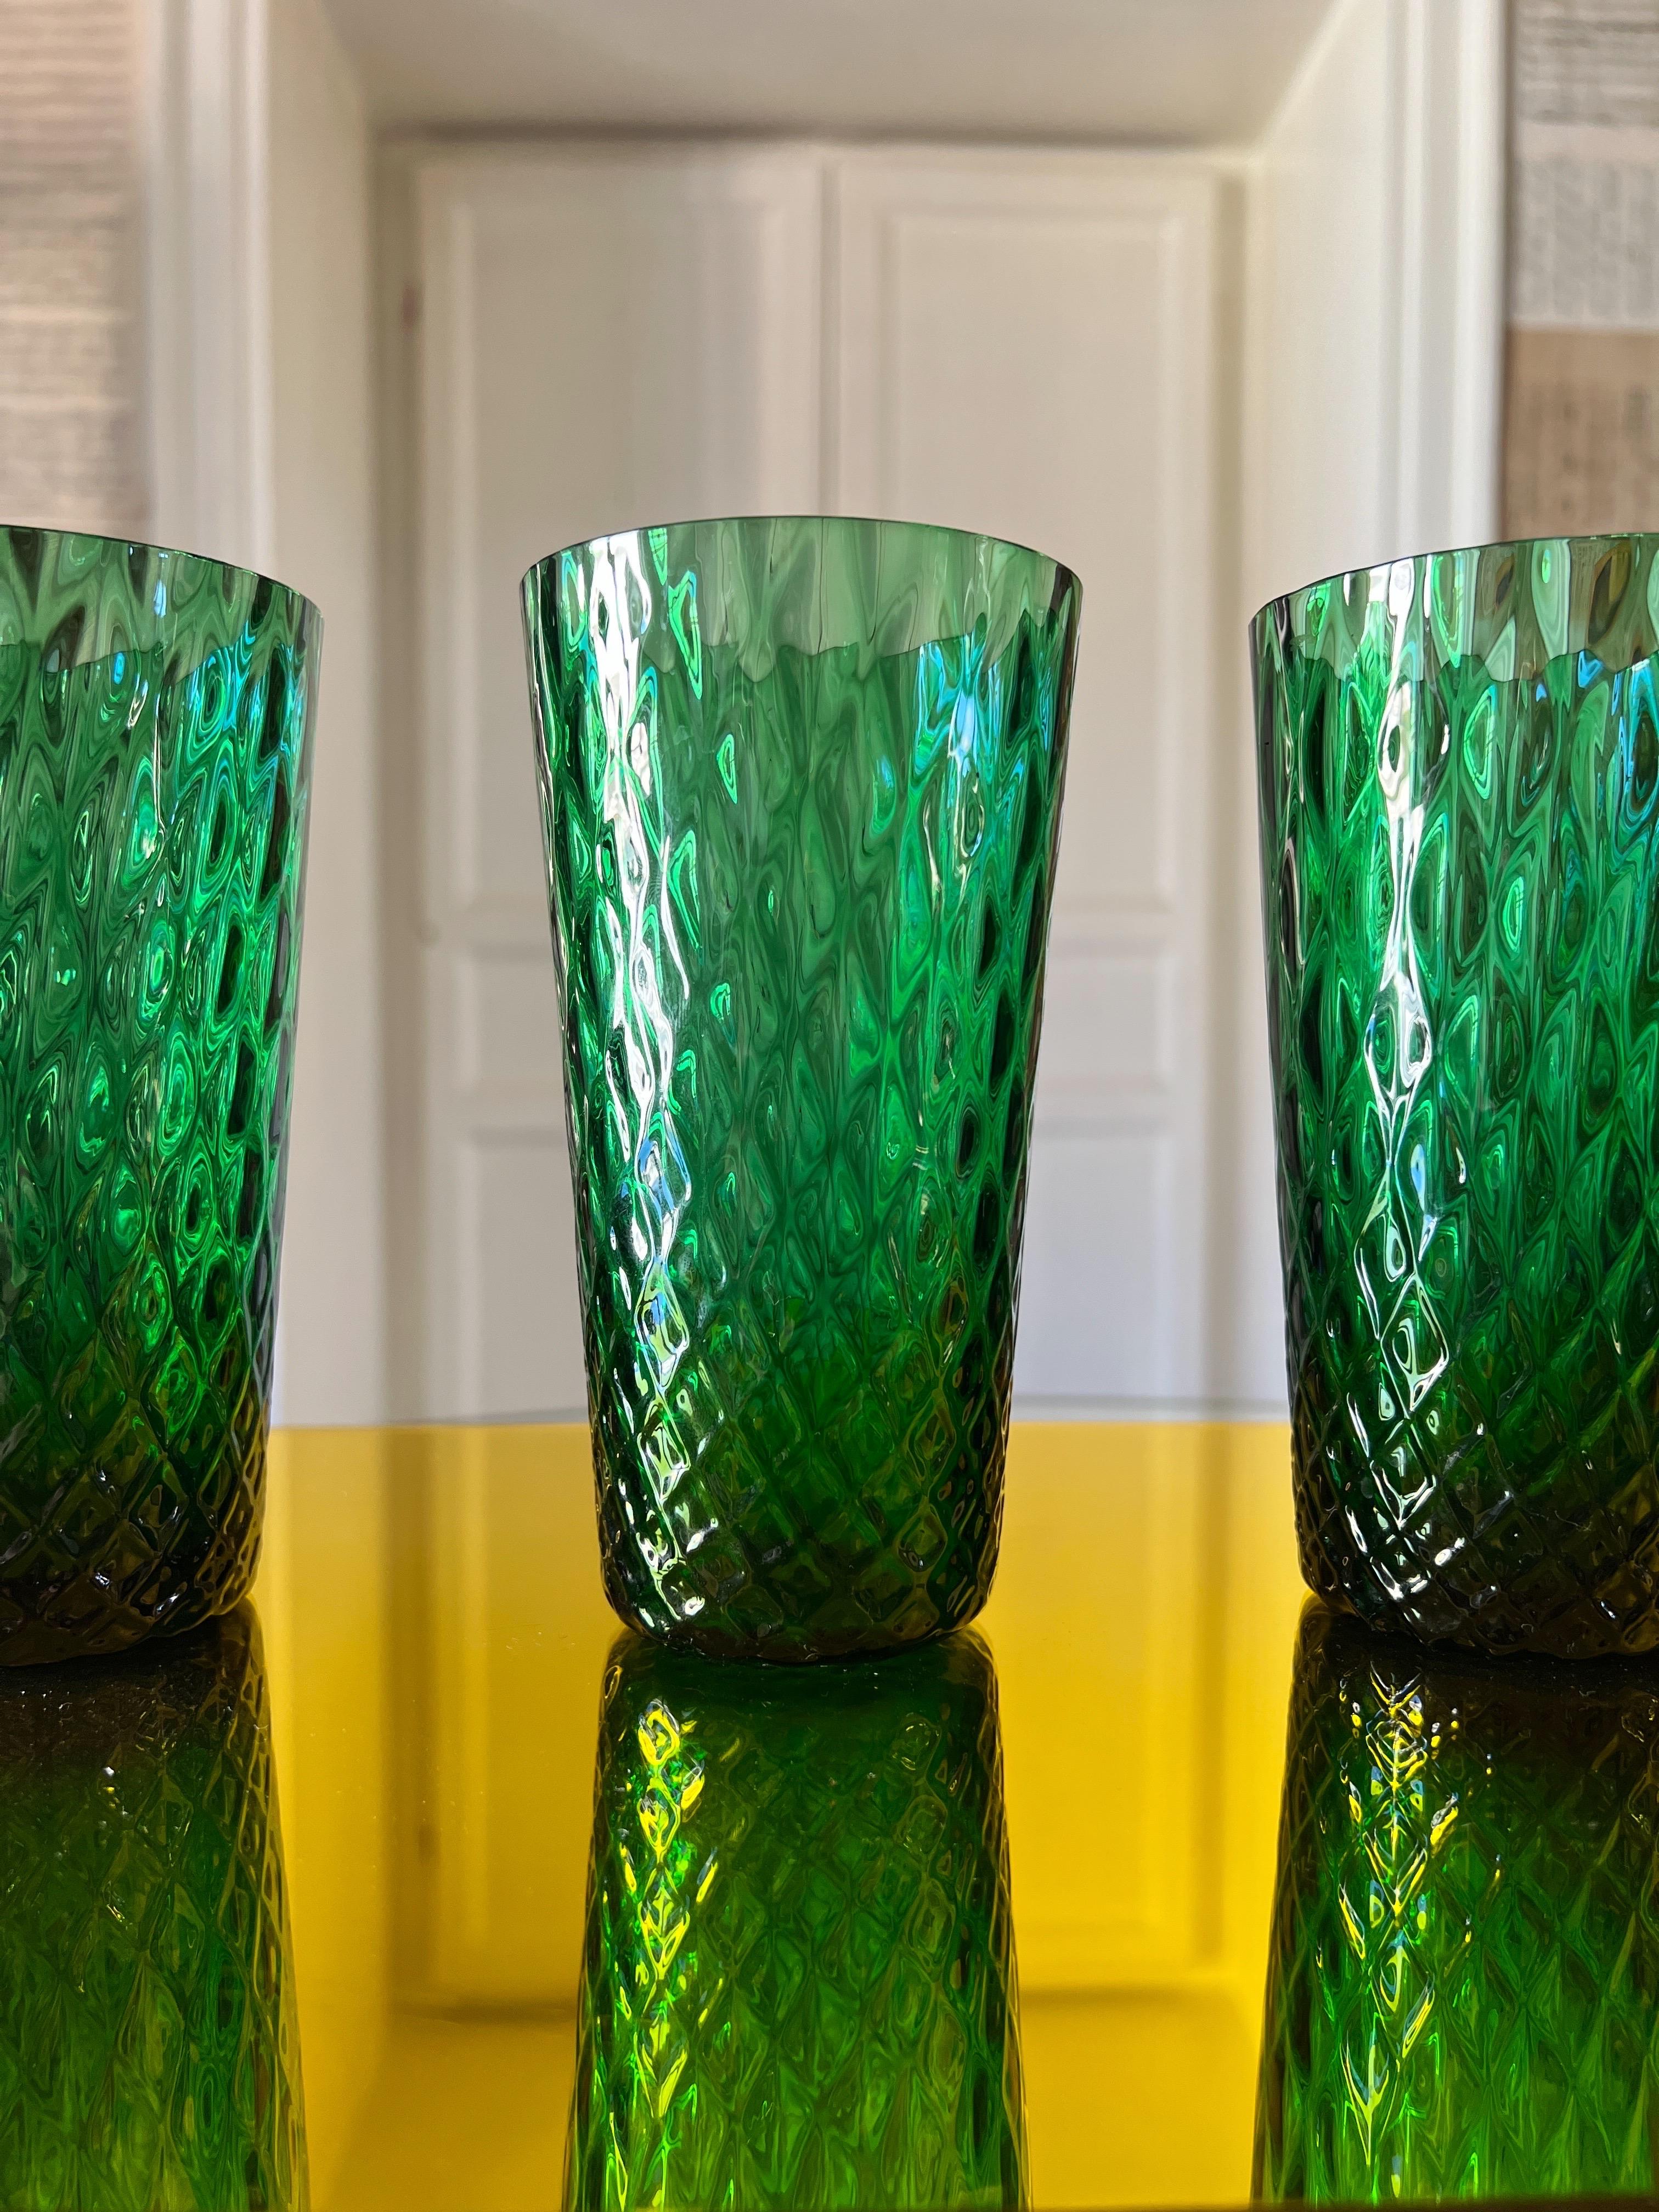 Discover the timeless elegance of these vintage glasses, attributed to design legend Carlo Scarpa, 1970. These exquisite pieces was part of the Vertical Collection, as documented in the book 